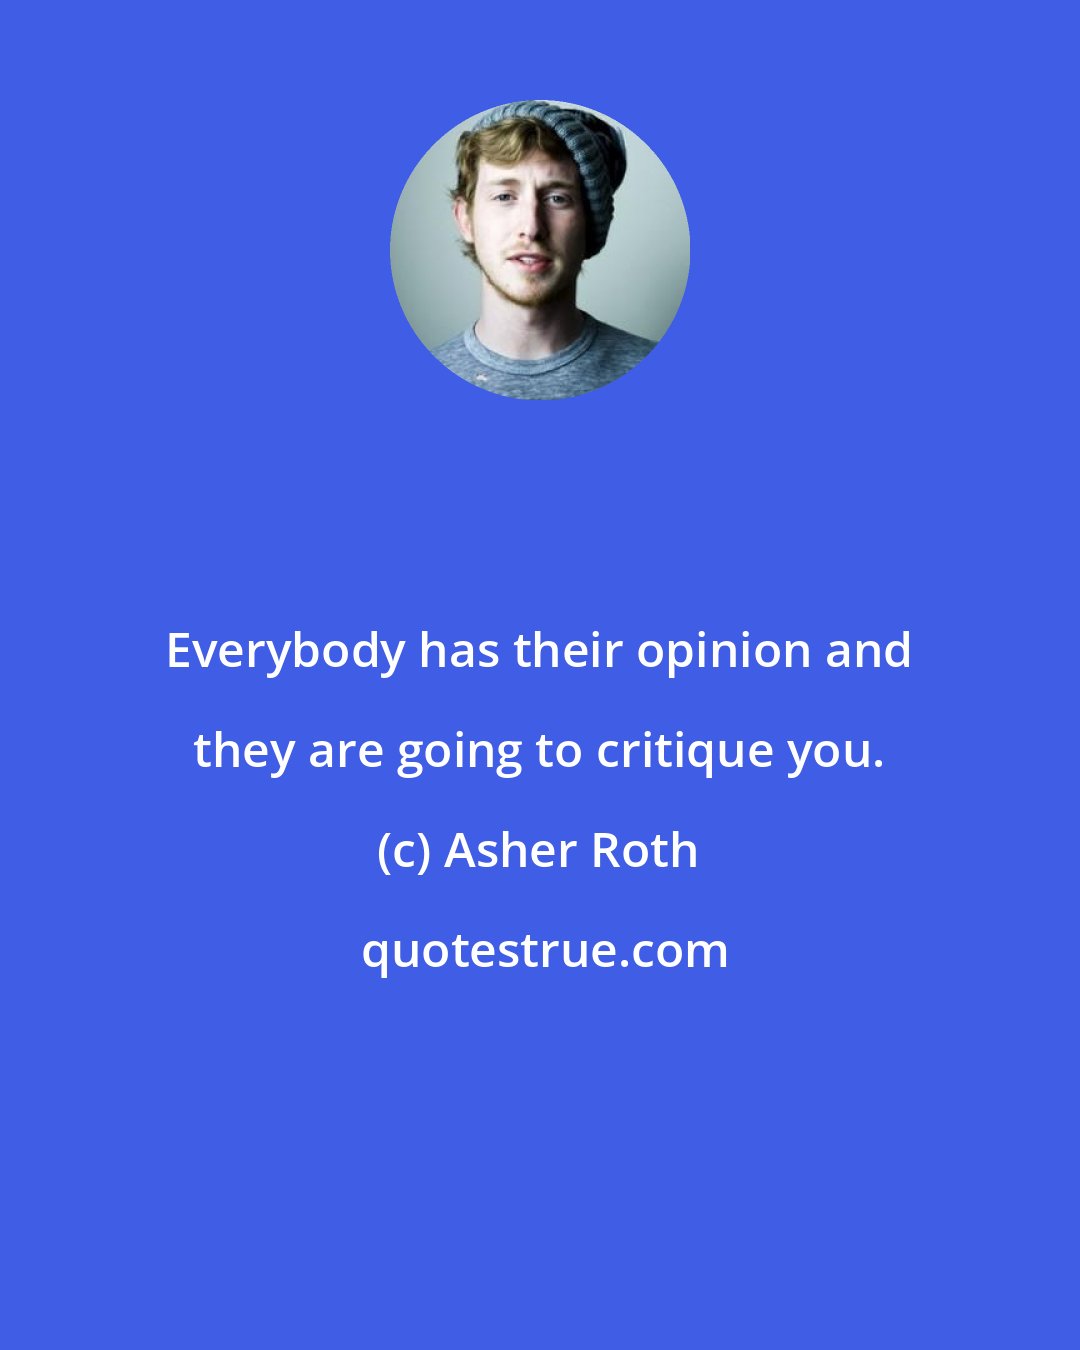 Asher Roth: Everybody has their opinion and they are going to critique you.